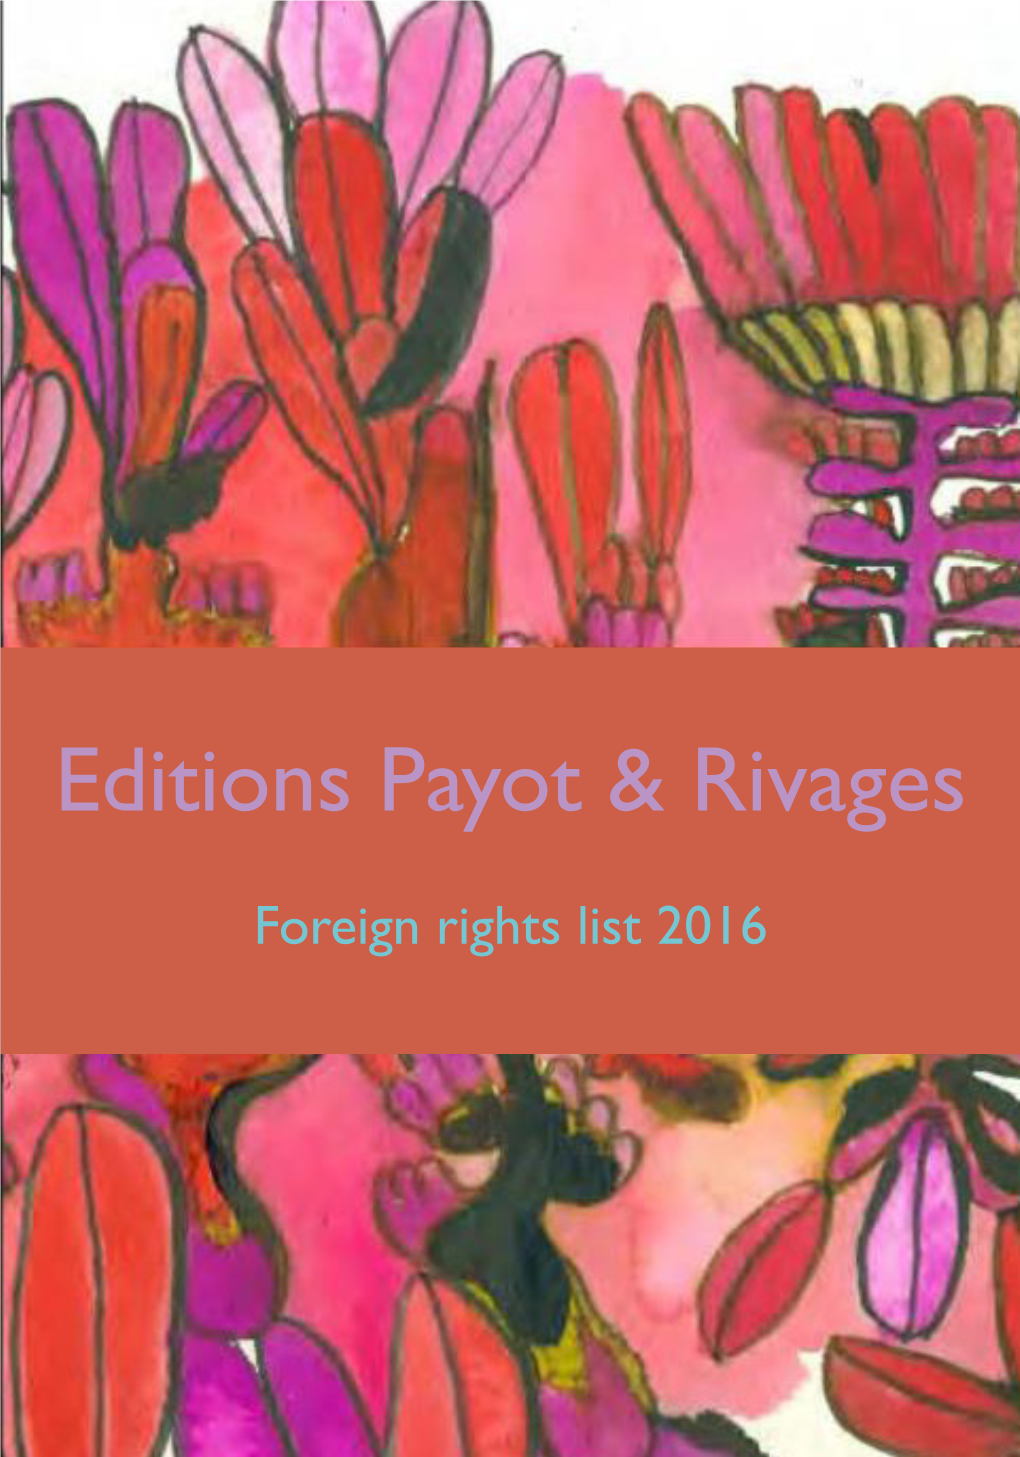 Editions Payot & Rivages